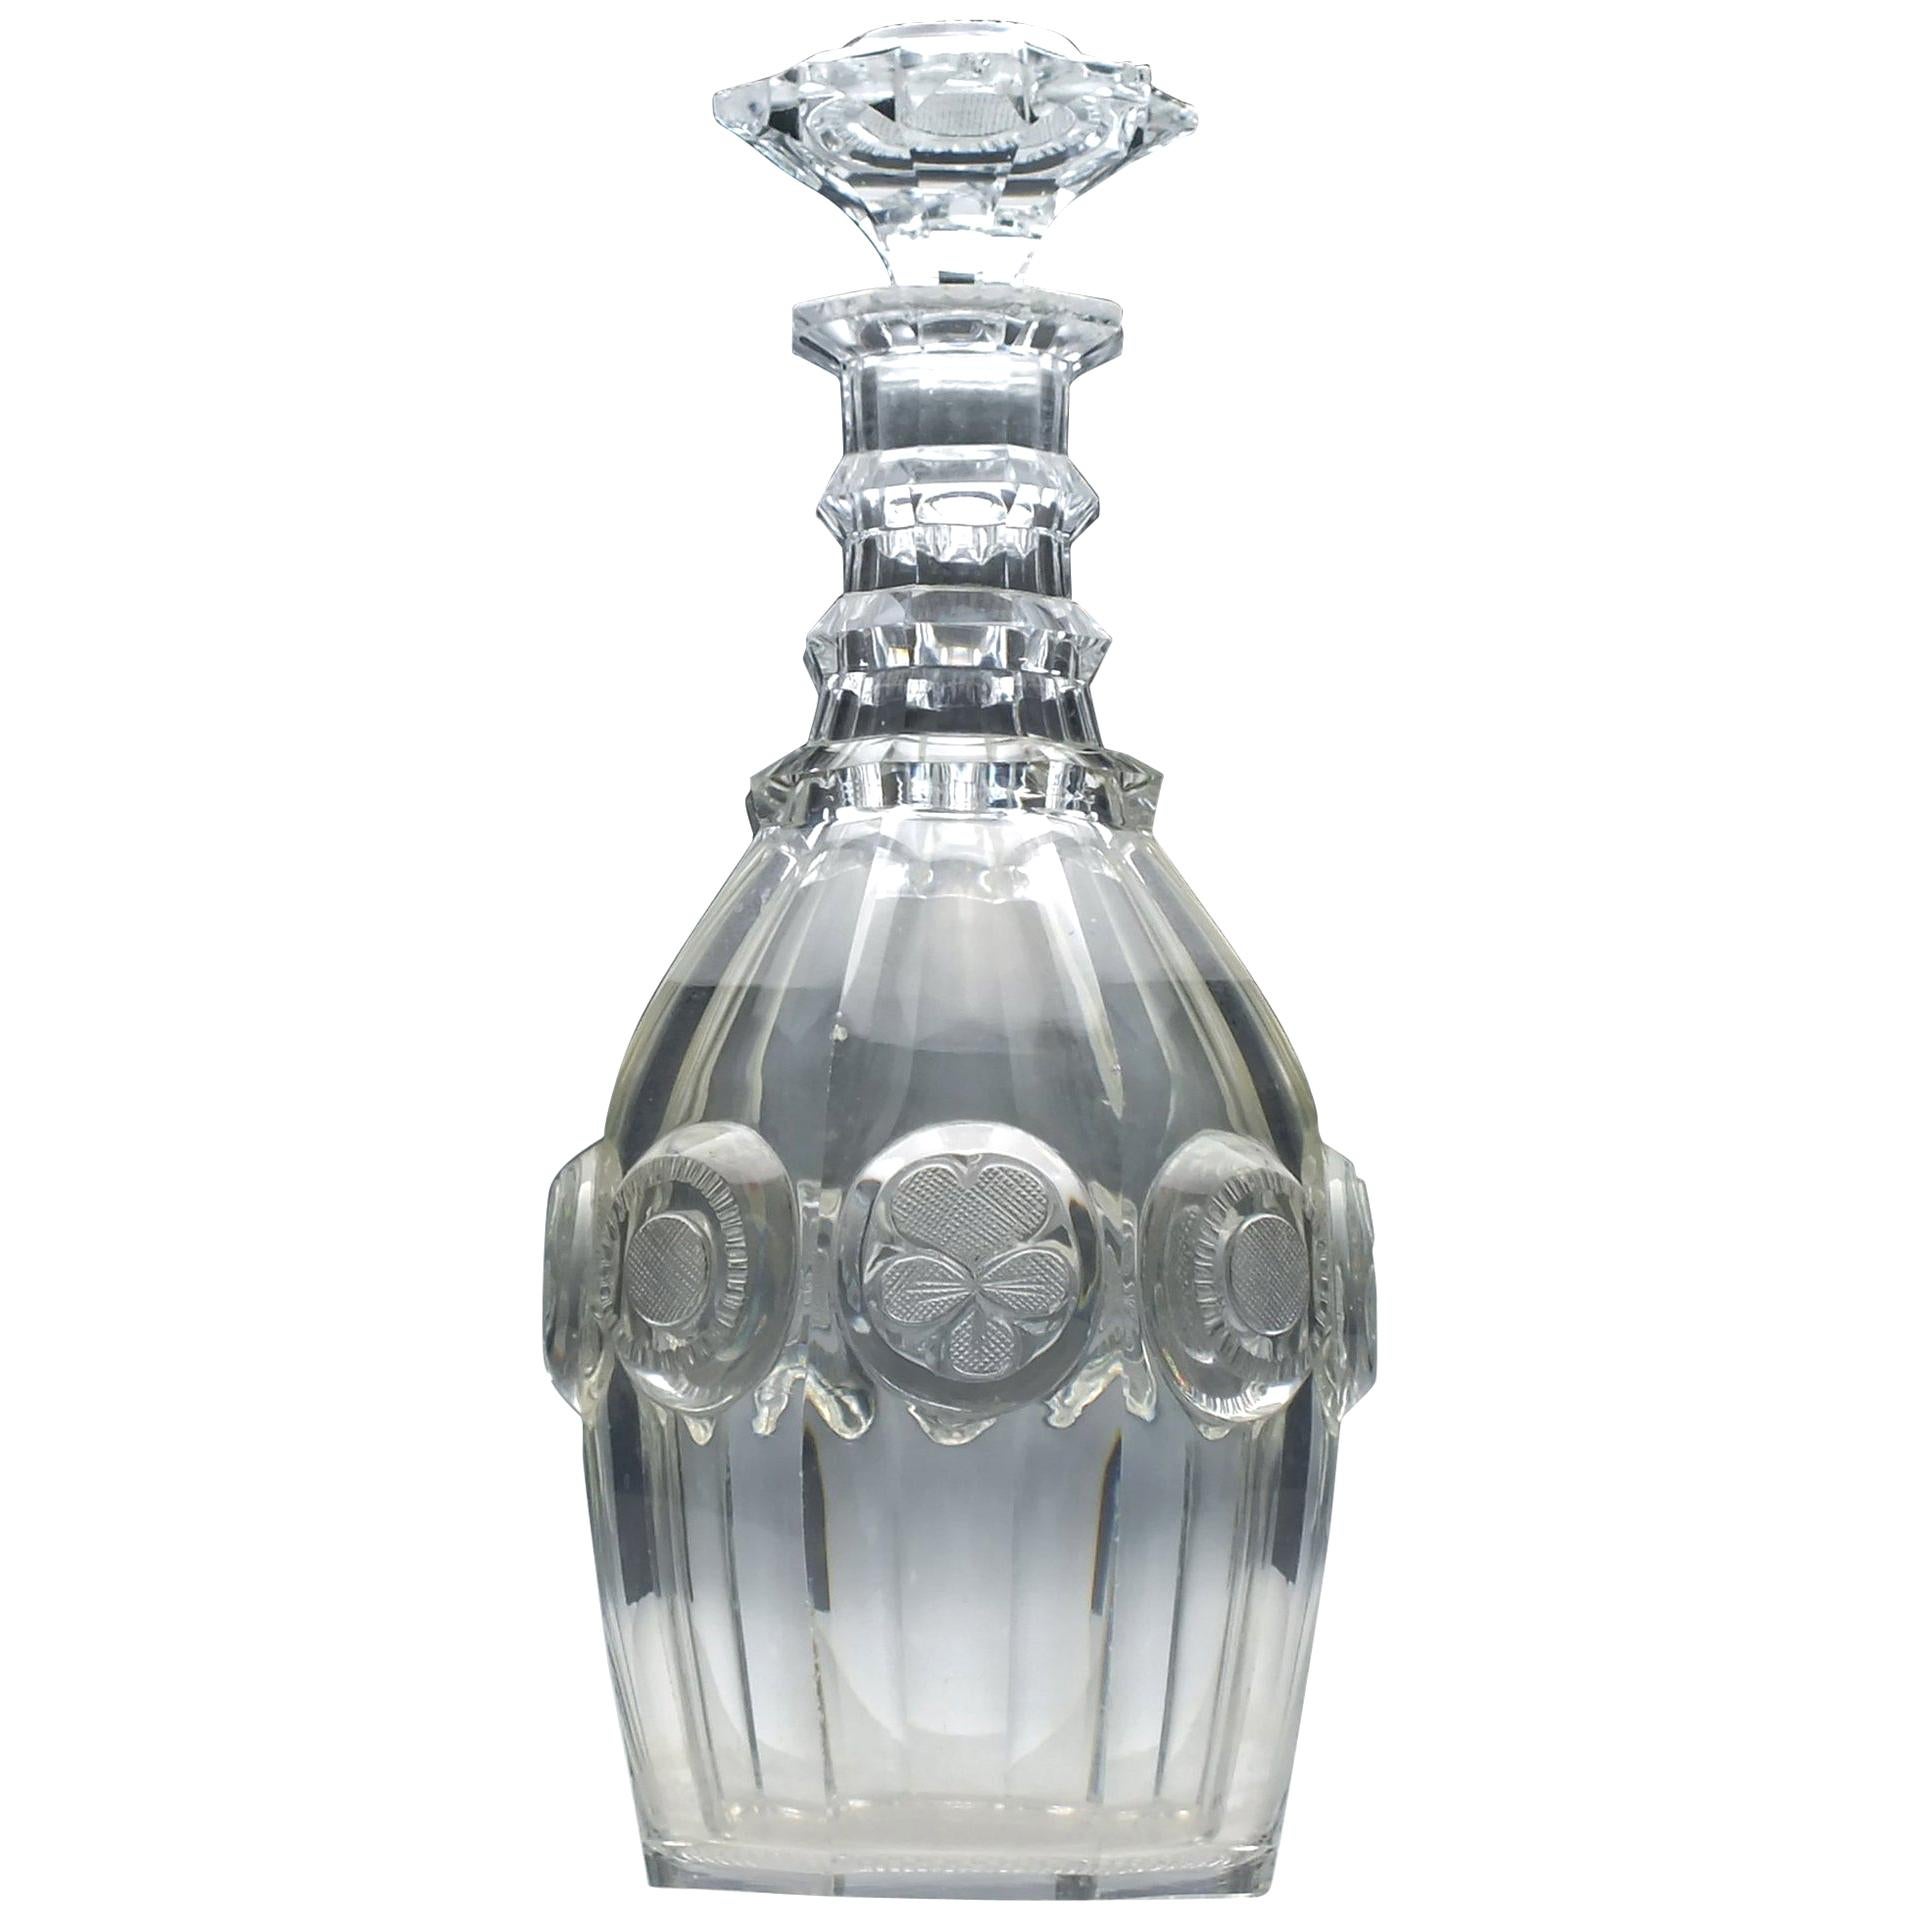 Very Rare 19th Century Cut French Saint Louis Decanter, circa 1830 For Sale